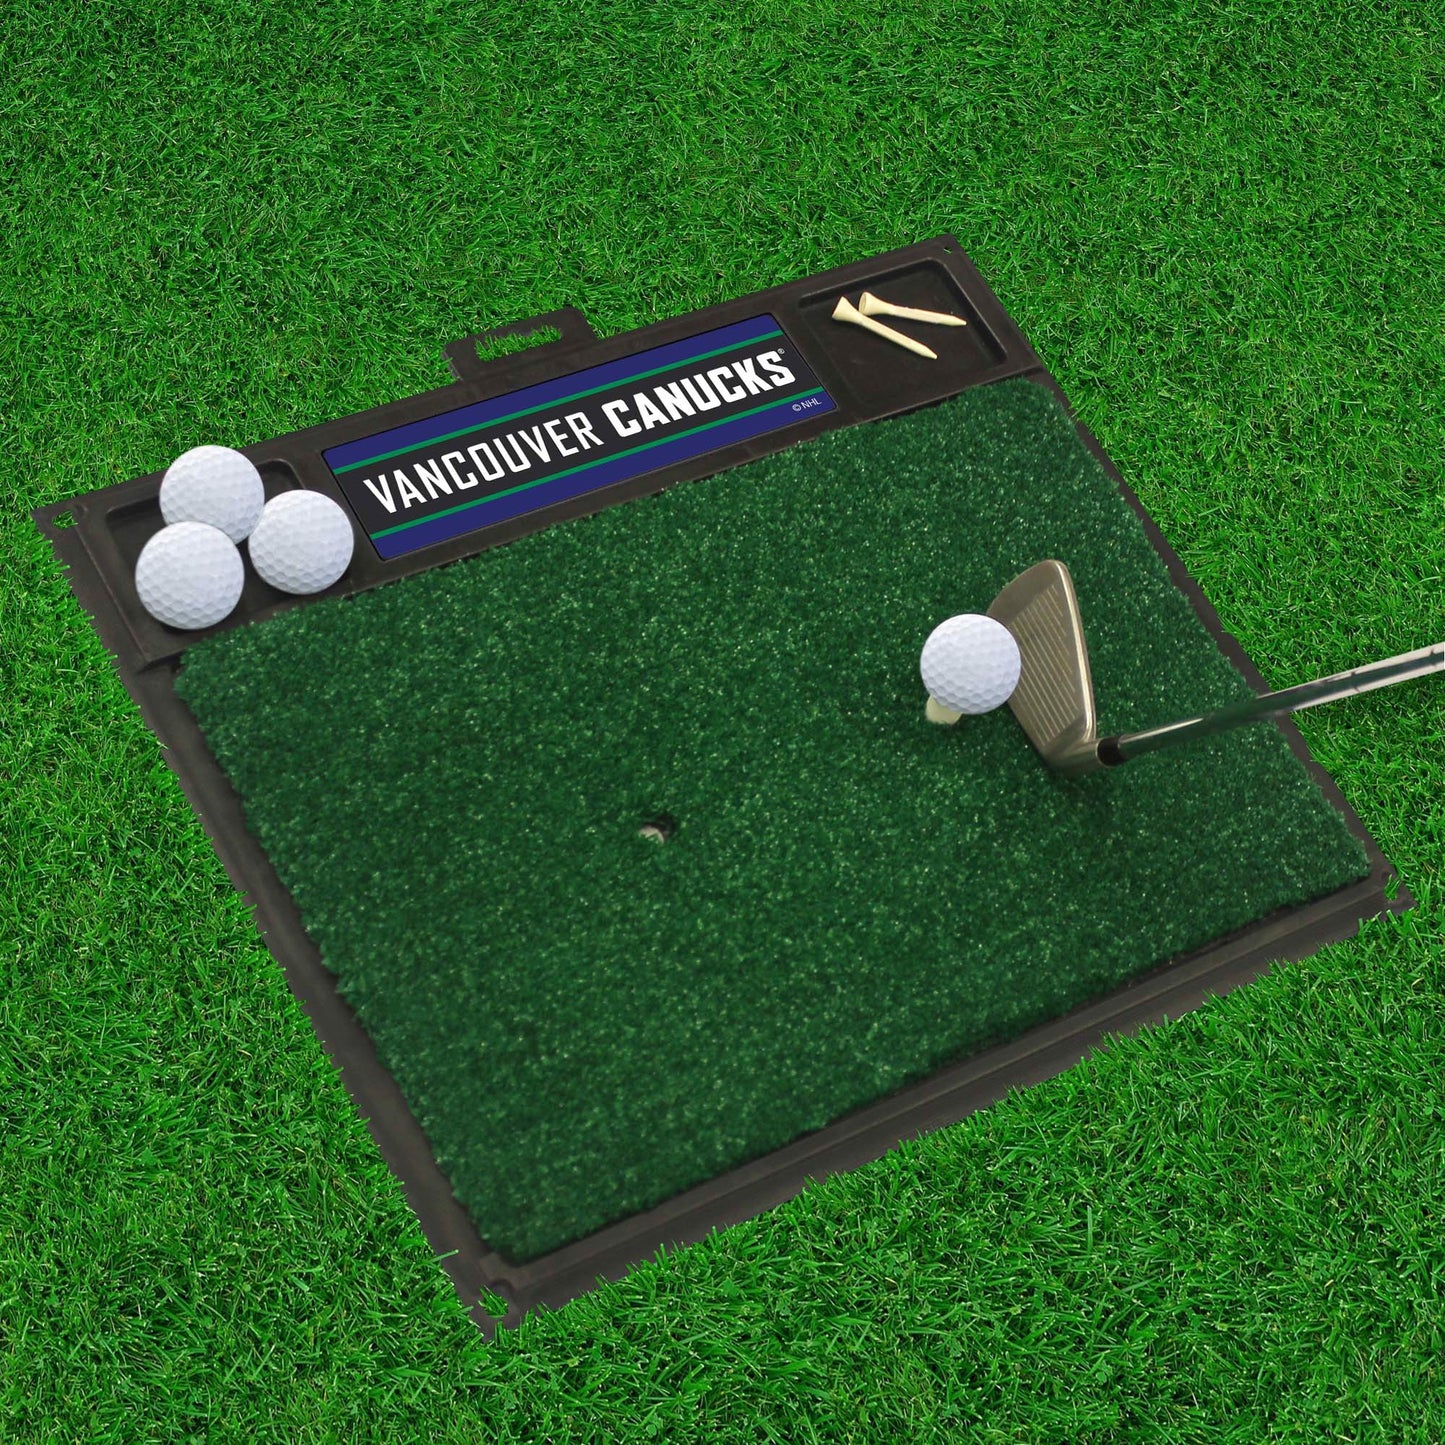 Vancouver Canucks Golf Hitting Mat by Fanmats